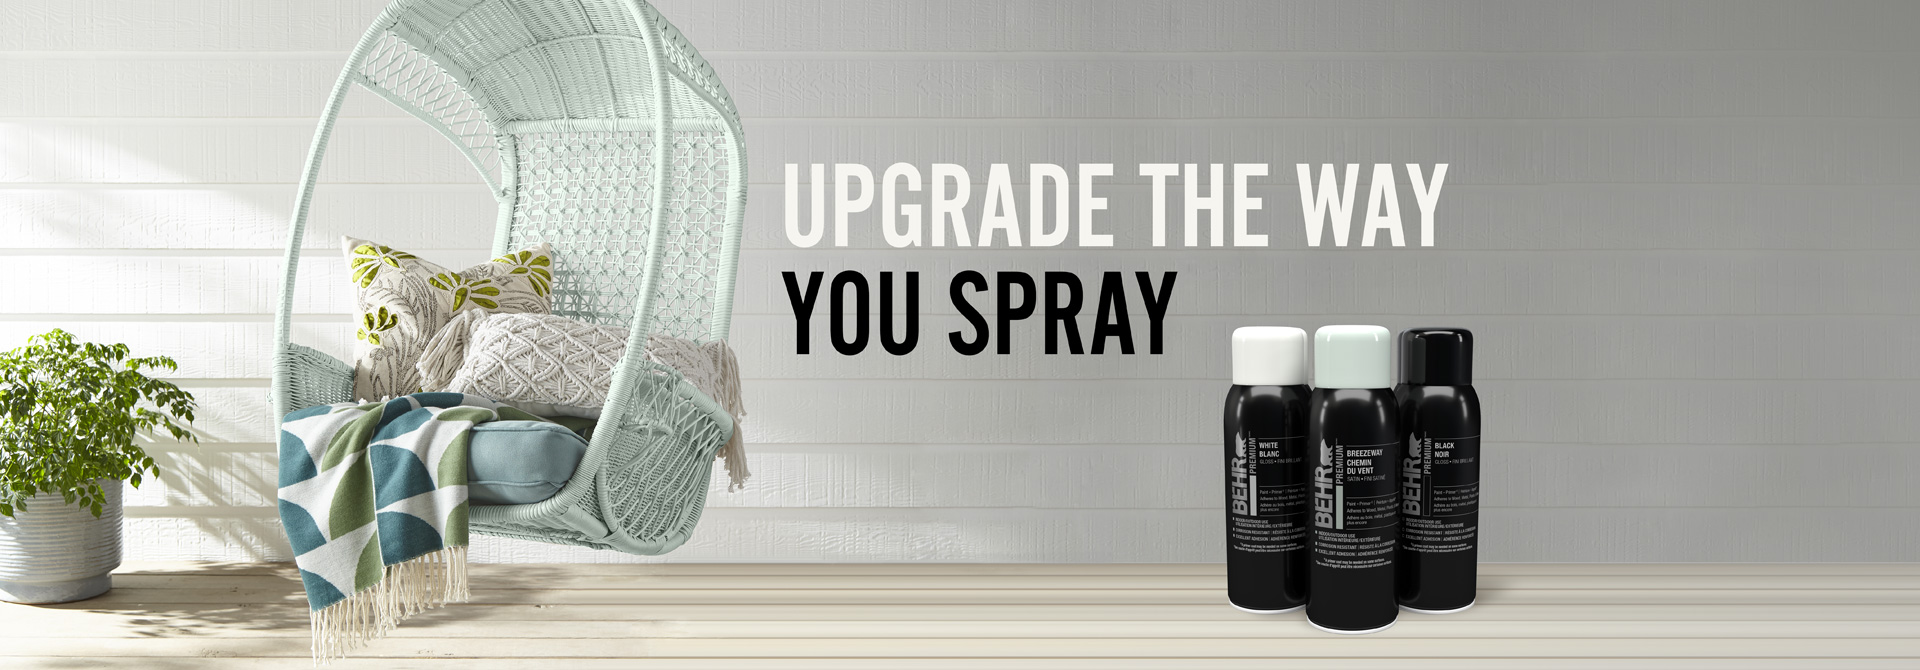 Behr Premium Spray paint cans with a chair in the background and text overlay that says Upgrade the way you spray.